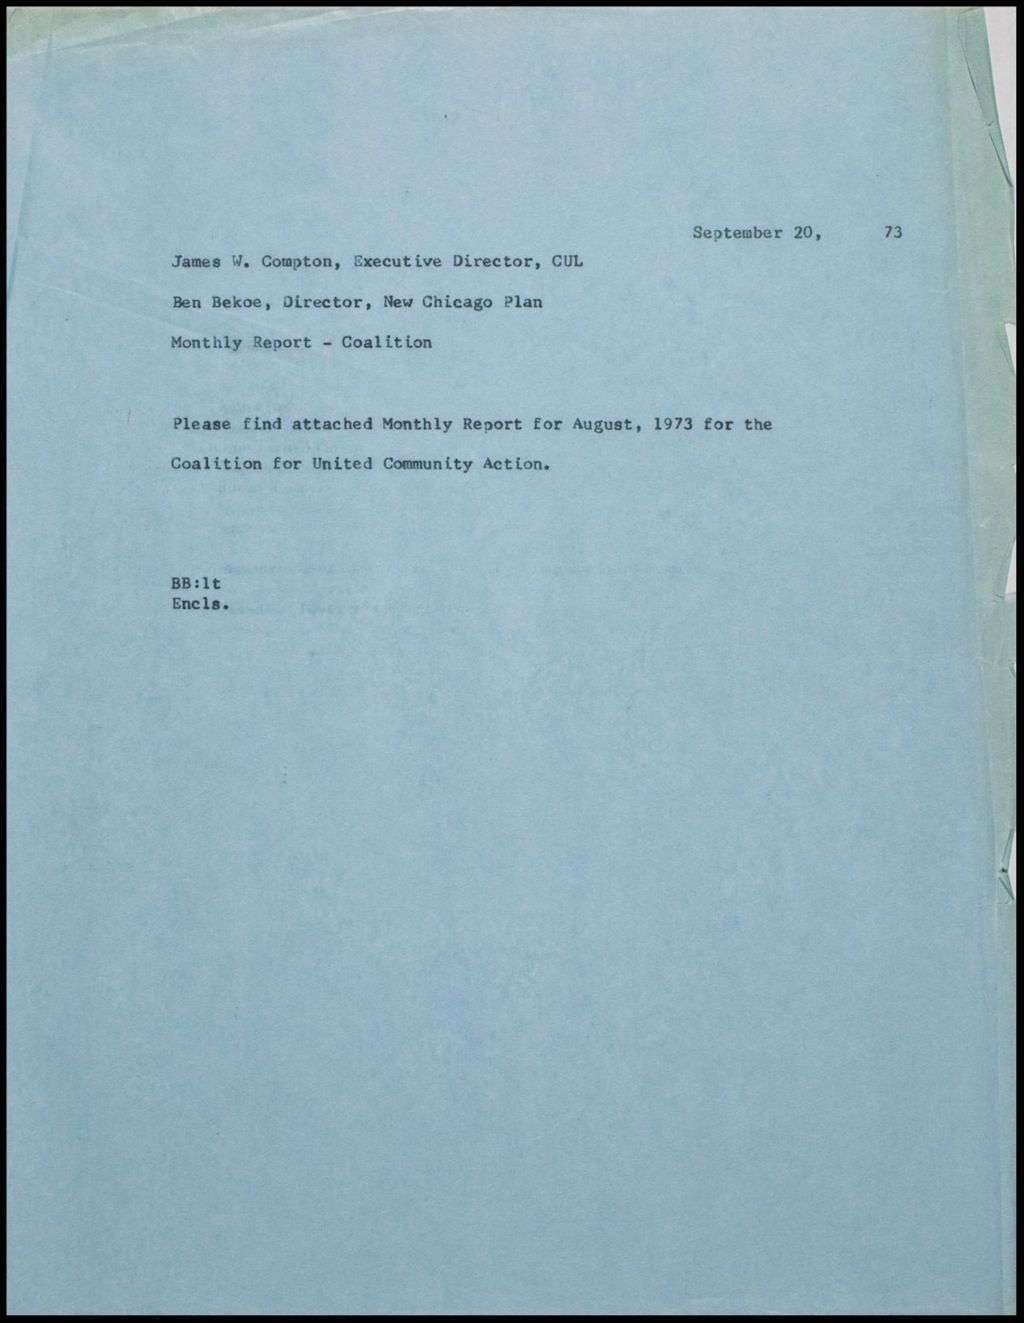 Miniature of Craft Committee Reports and Summaries, 1973 (Folder II-948)